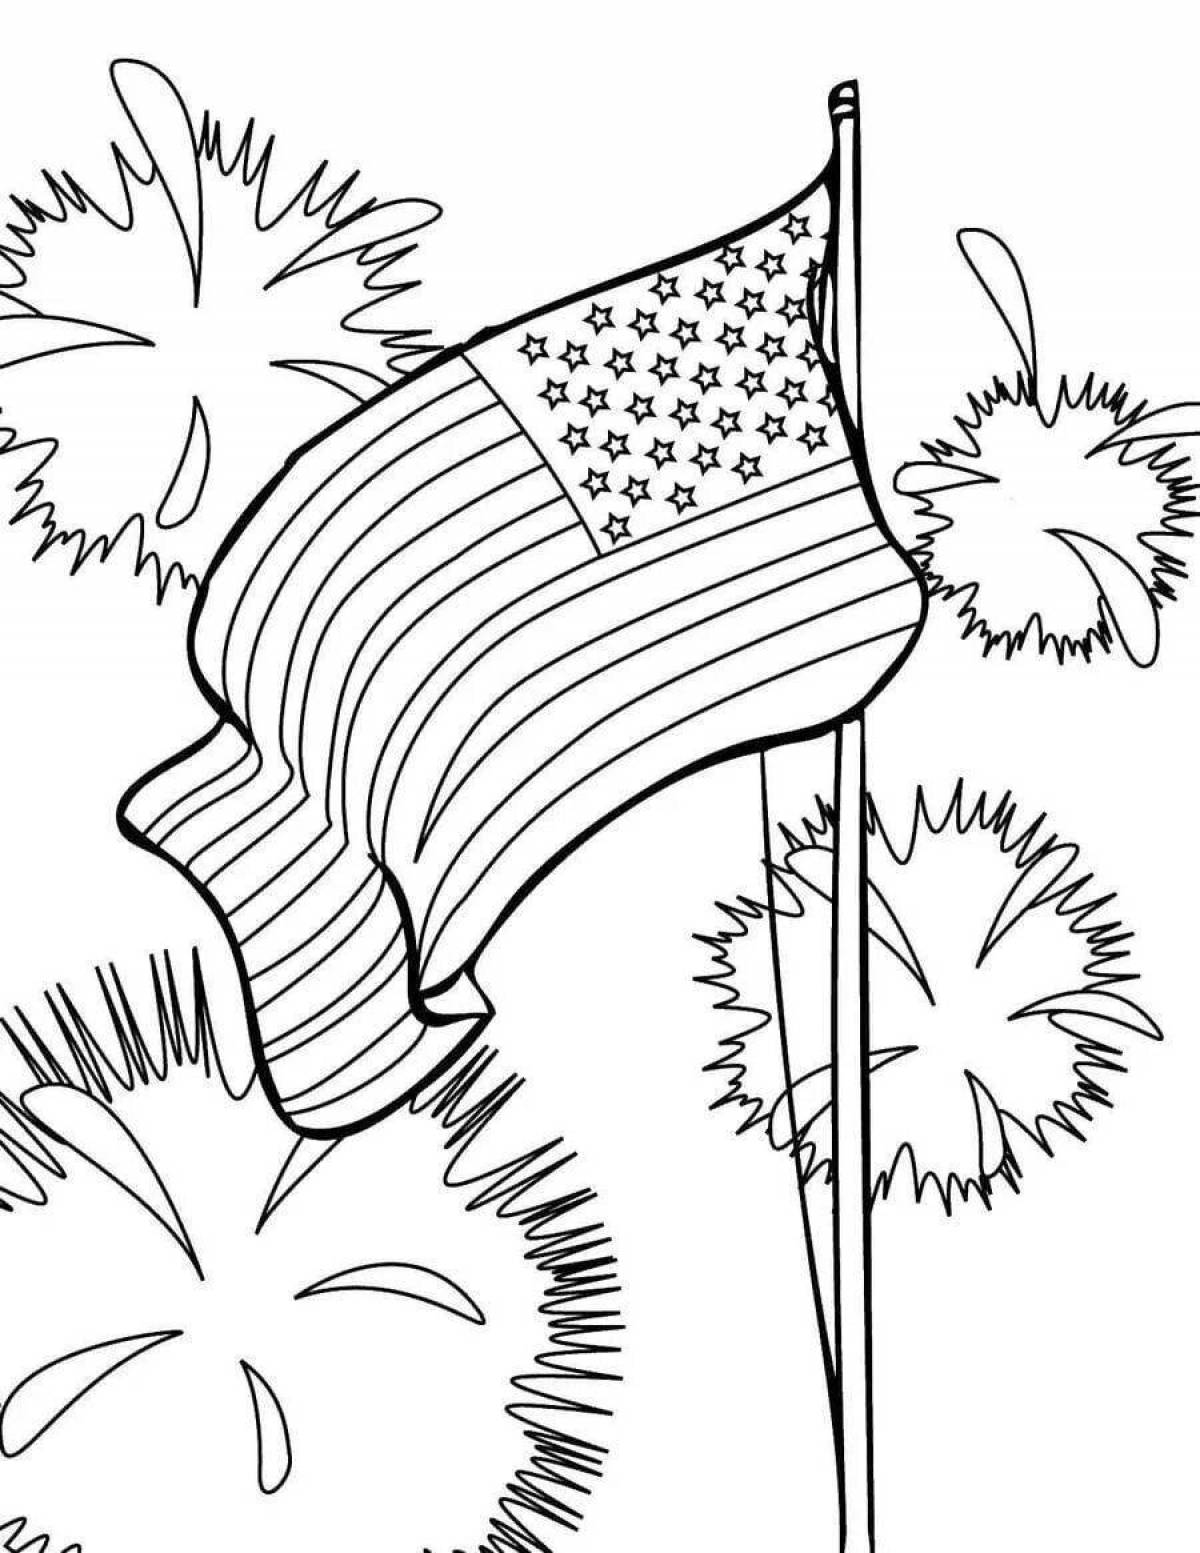 Prosperous victory coloring page banner